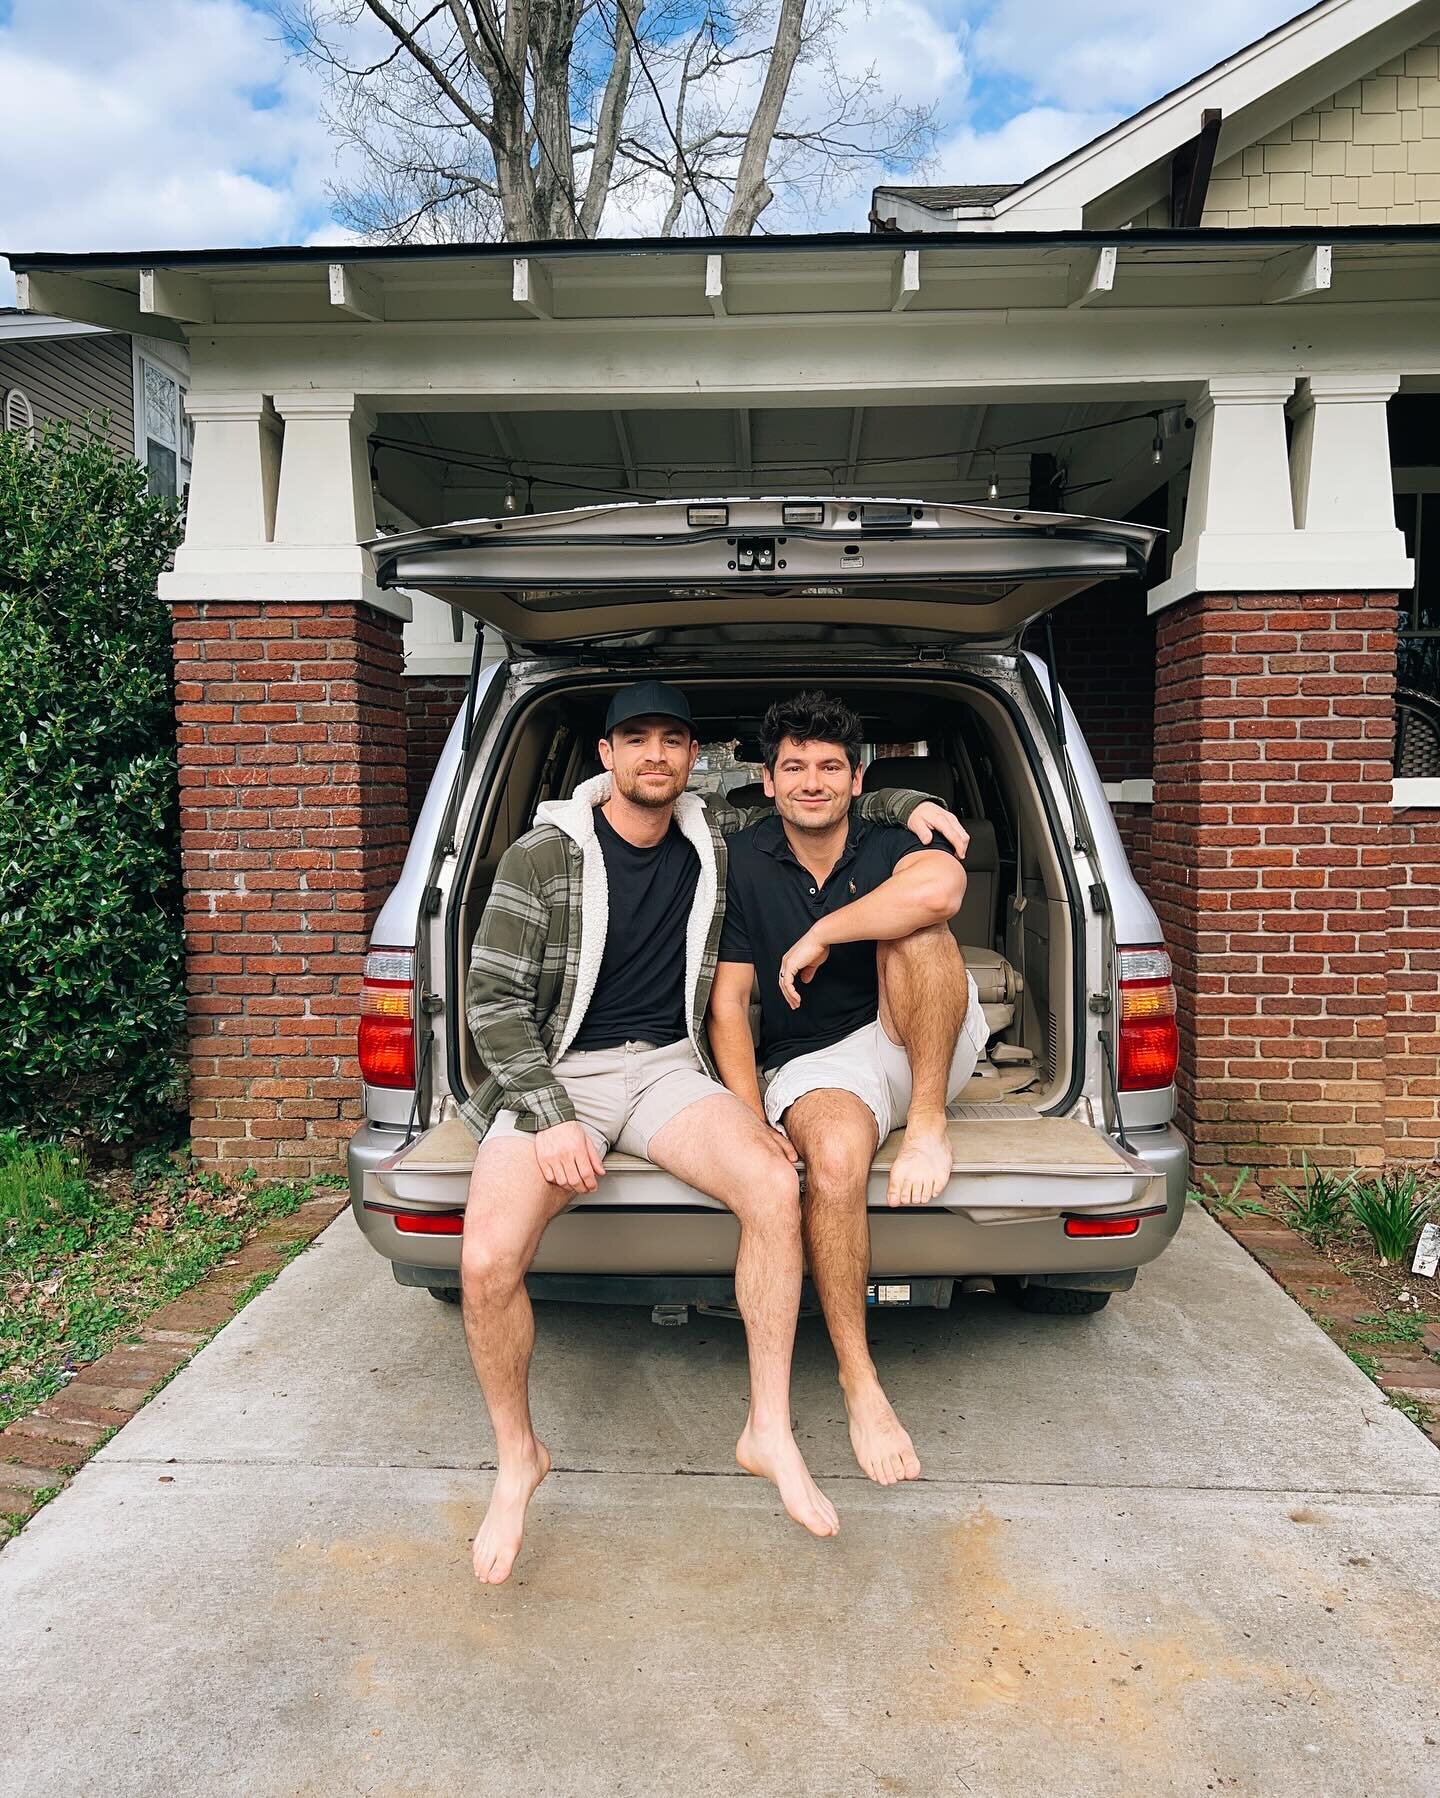 The end of an era. It may seem small, but we closed a chapter of our life this week when we sold our beloved 1999 Land Cruiser. In an effort to perpetually minimize and simplify our lives, we put it up for sale, and two days later, a man from out of 